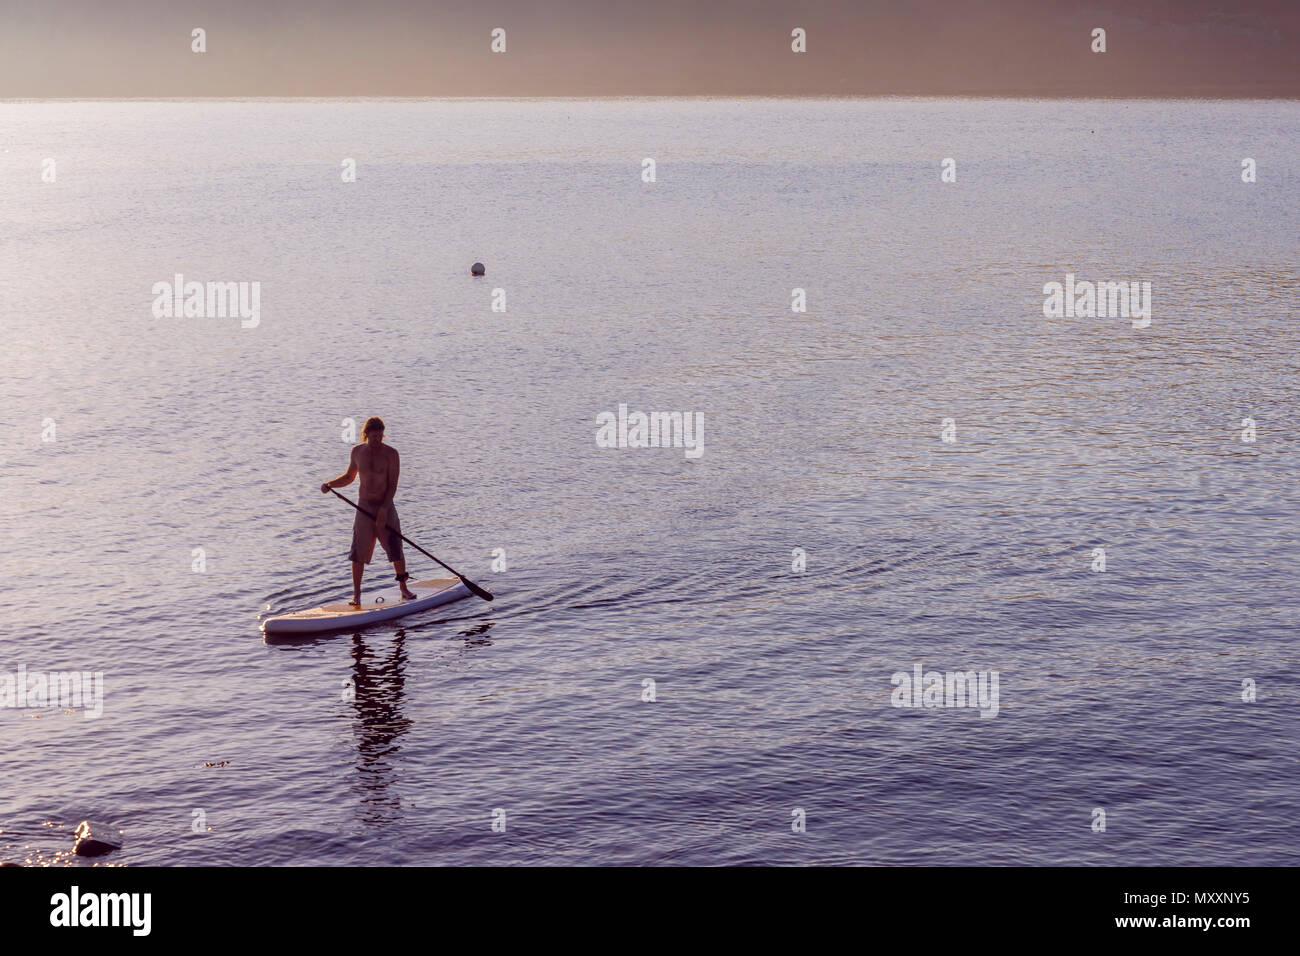 Man on a stand up paddleboard (SUP) during sunset at Kimmeridge Bay, Dorset, England, UK Stock Photo